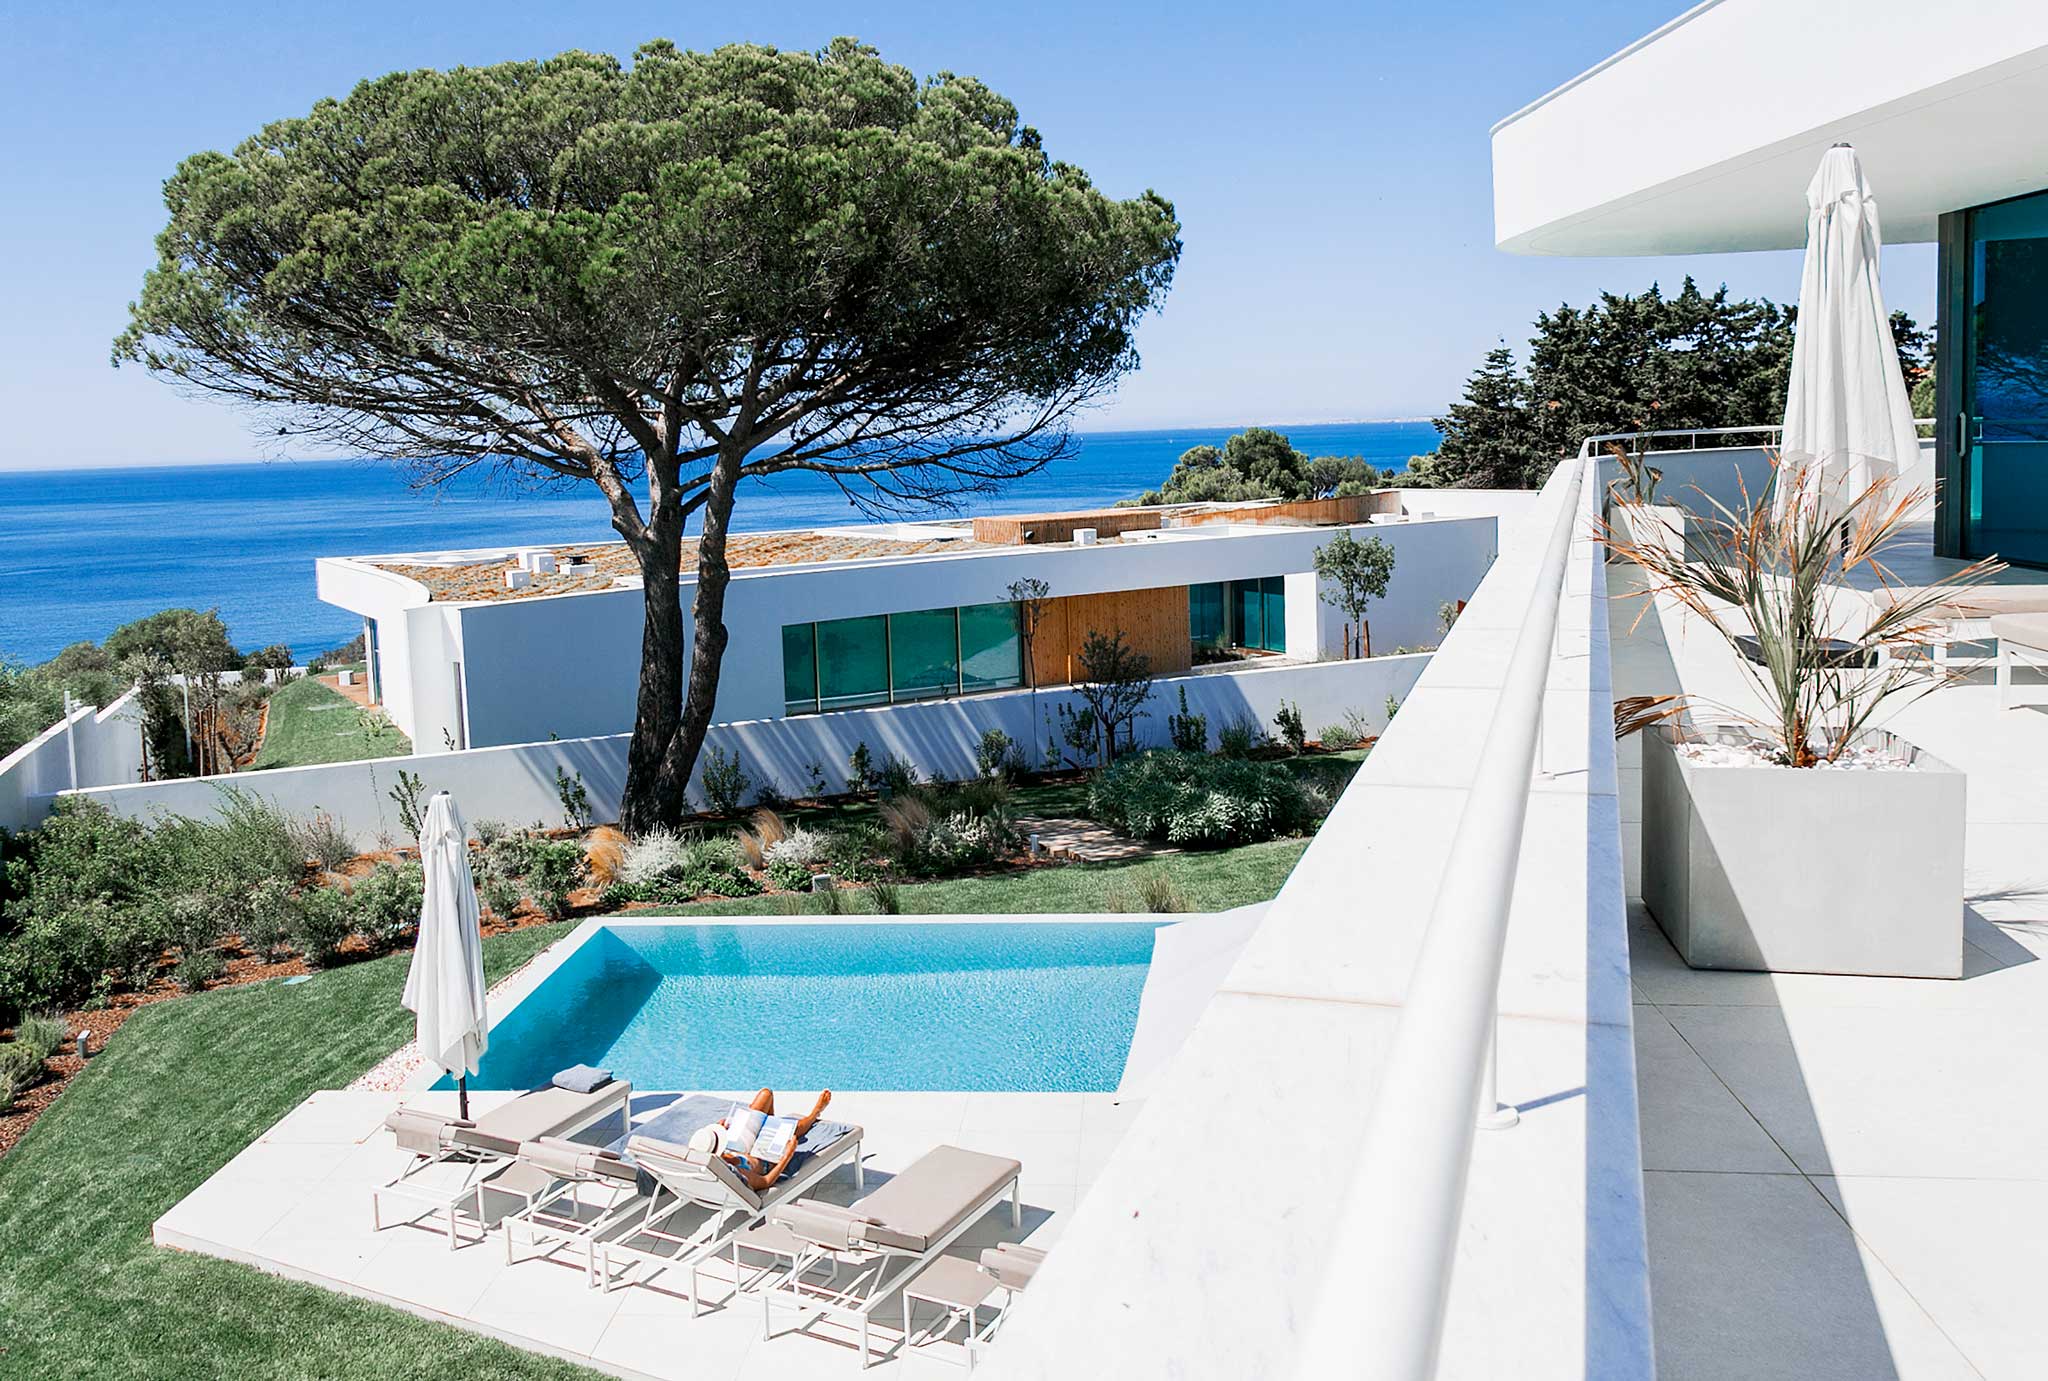 Looking out on the Atlantic ocean and an infnity pool with two white luxury villas in the picture at Lux Mare